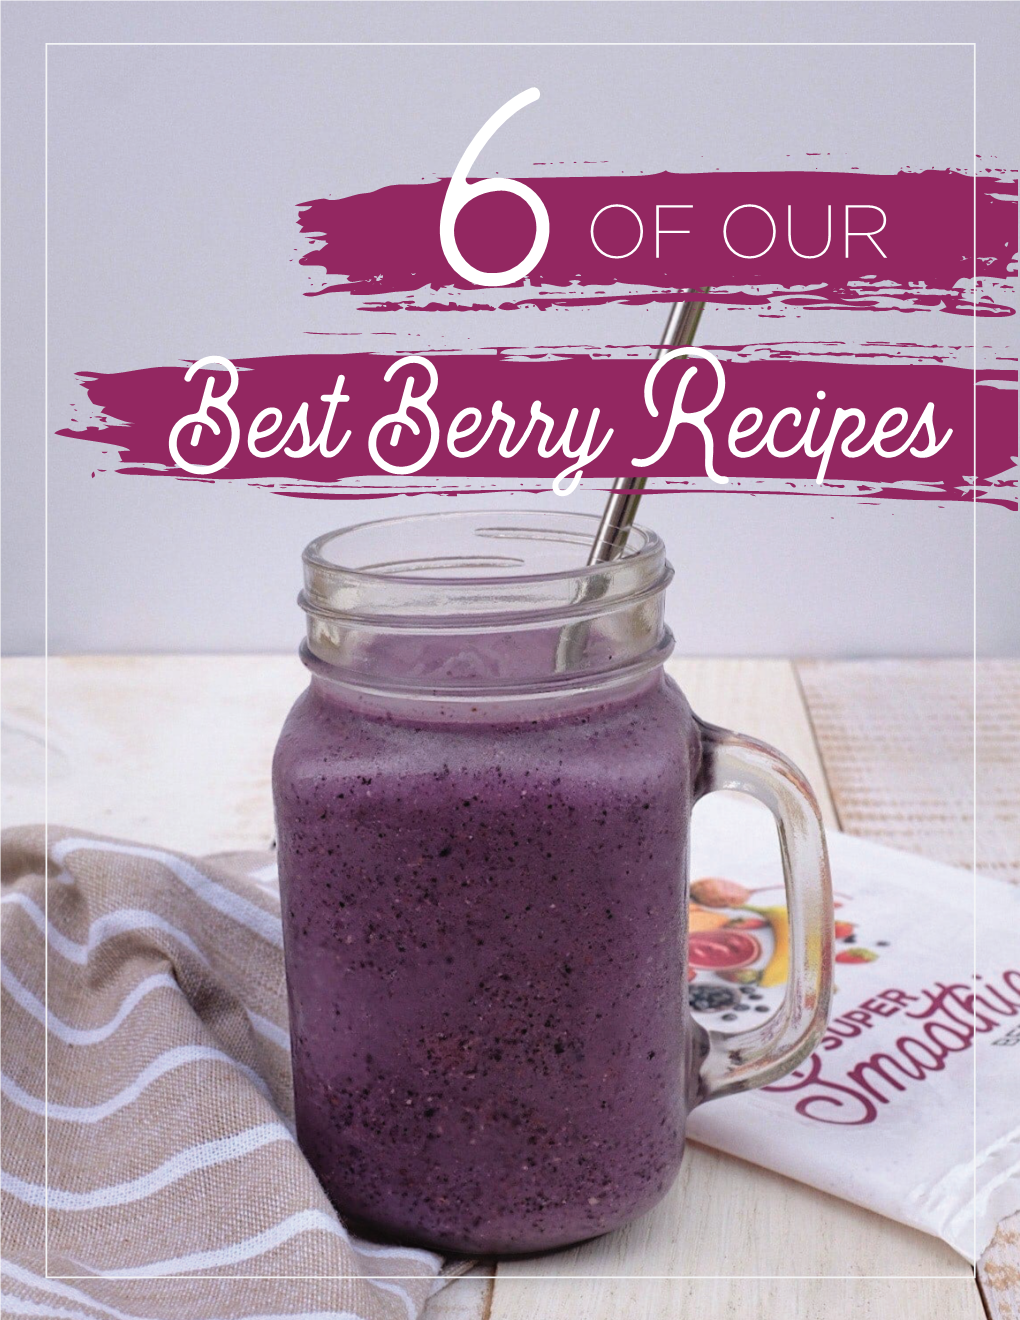 6 of Our Best Berry Recipes Ebook REVISED